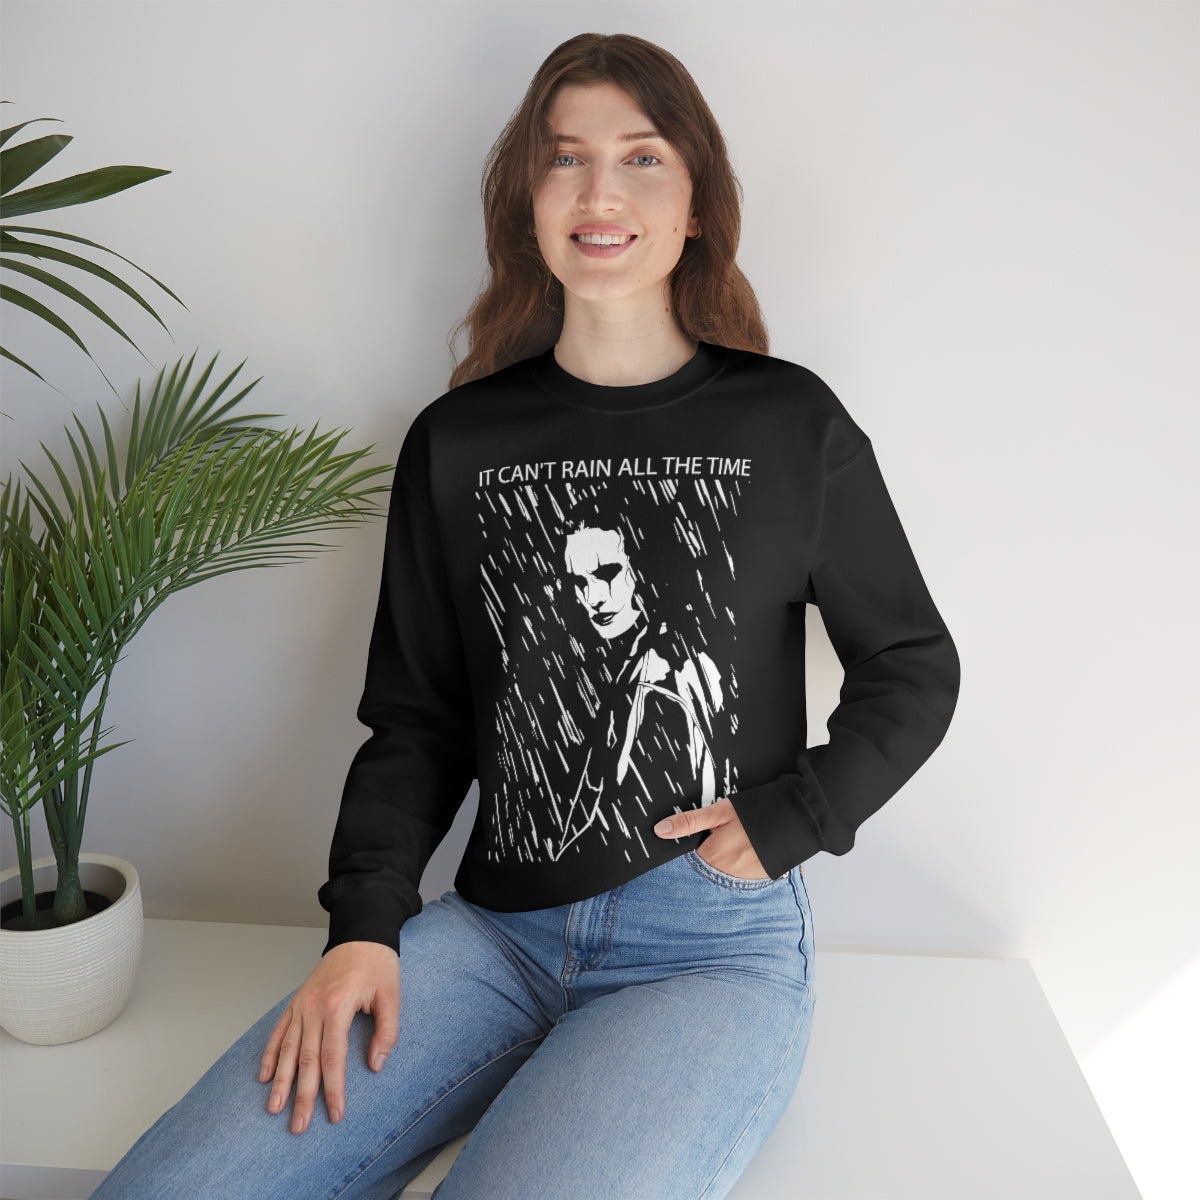 The Crow - It Can't Rain All the Time Sweatshirt